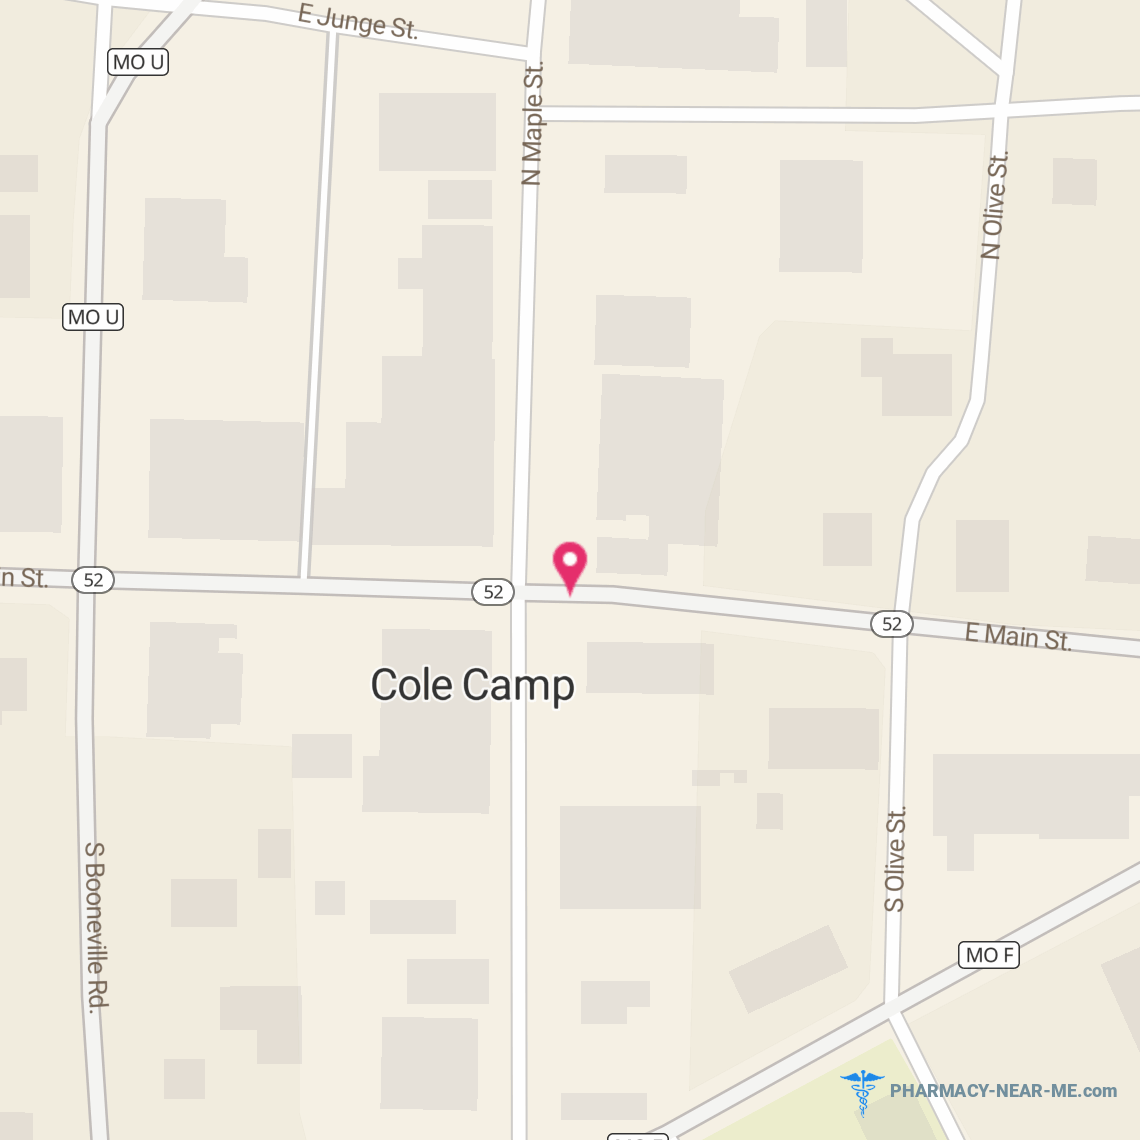 COLE CAMP PHARMACY - Pharmacy Hours, Phone, Reviews & Information: 106 South Maple Street, Cole Camp, Missouri 65325, United States